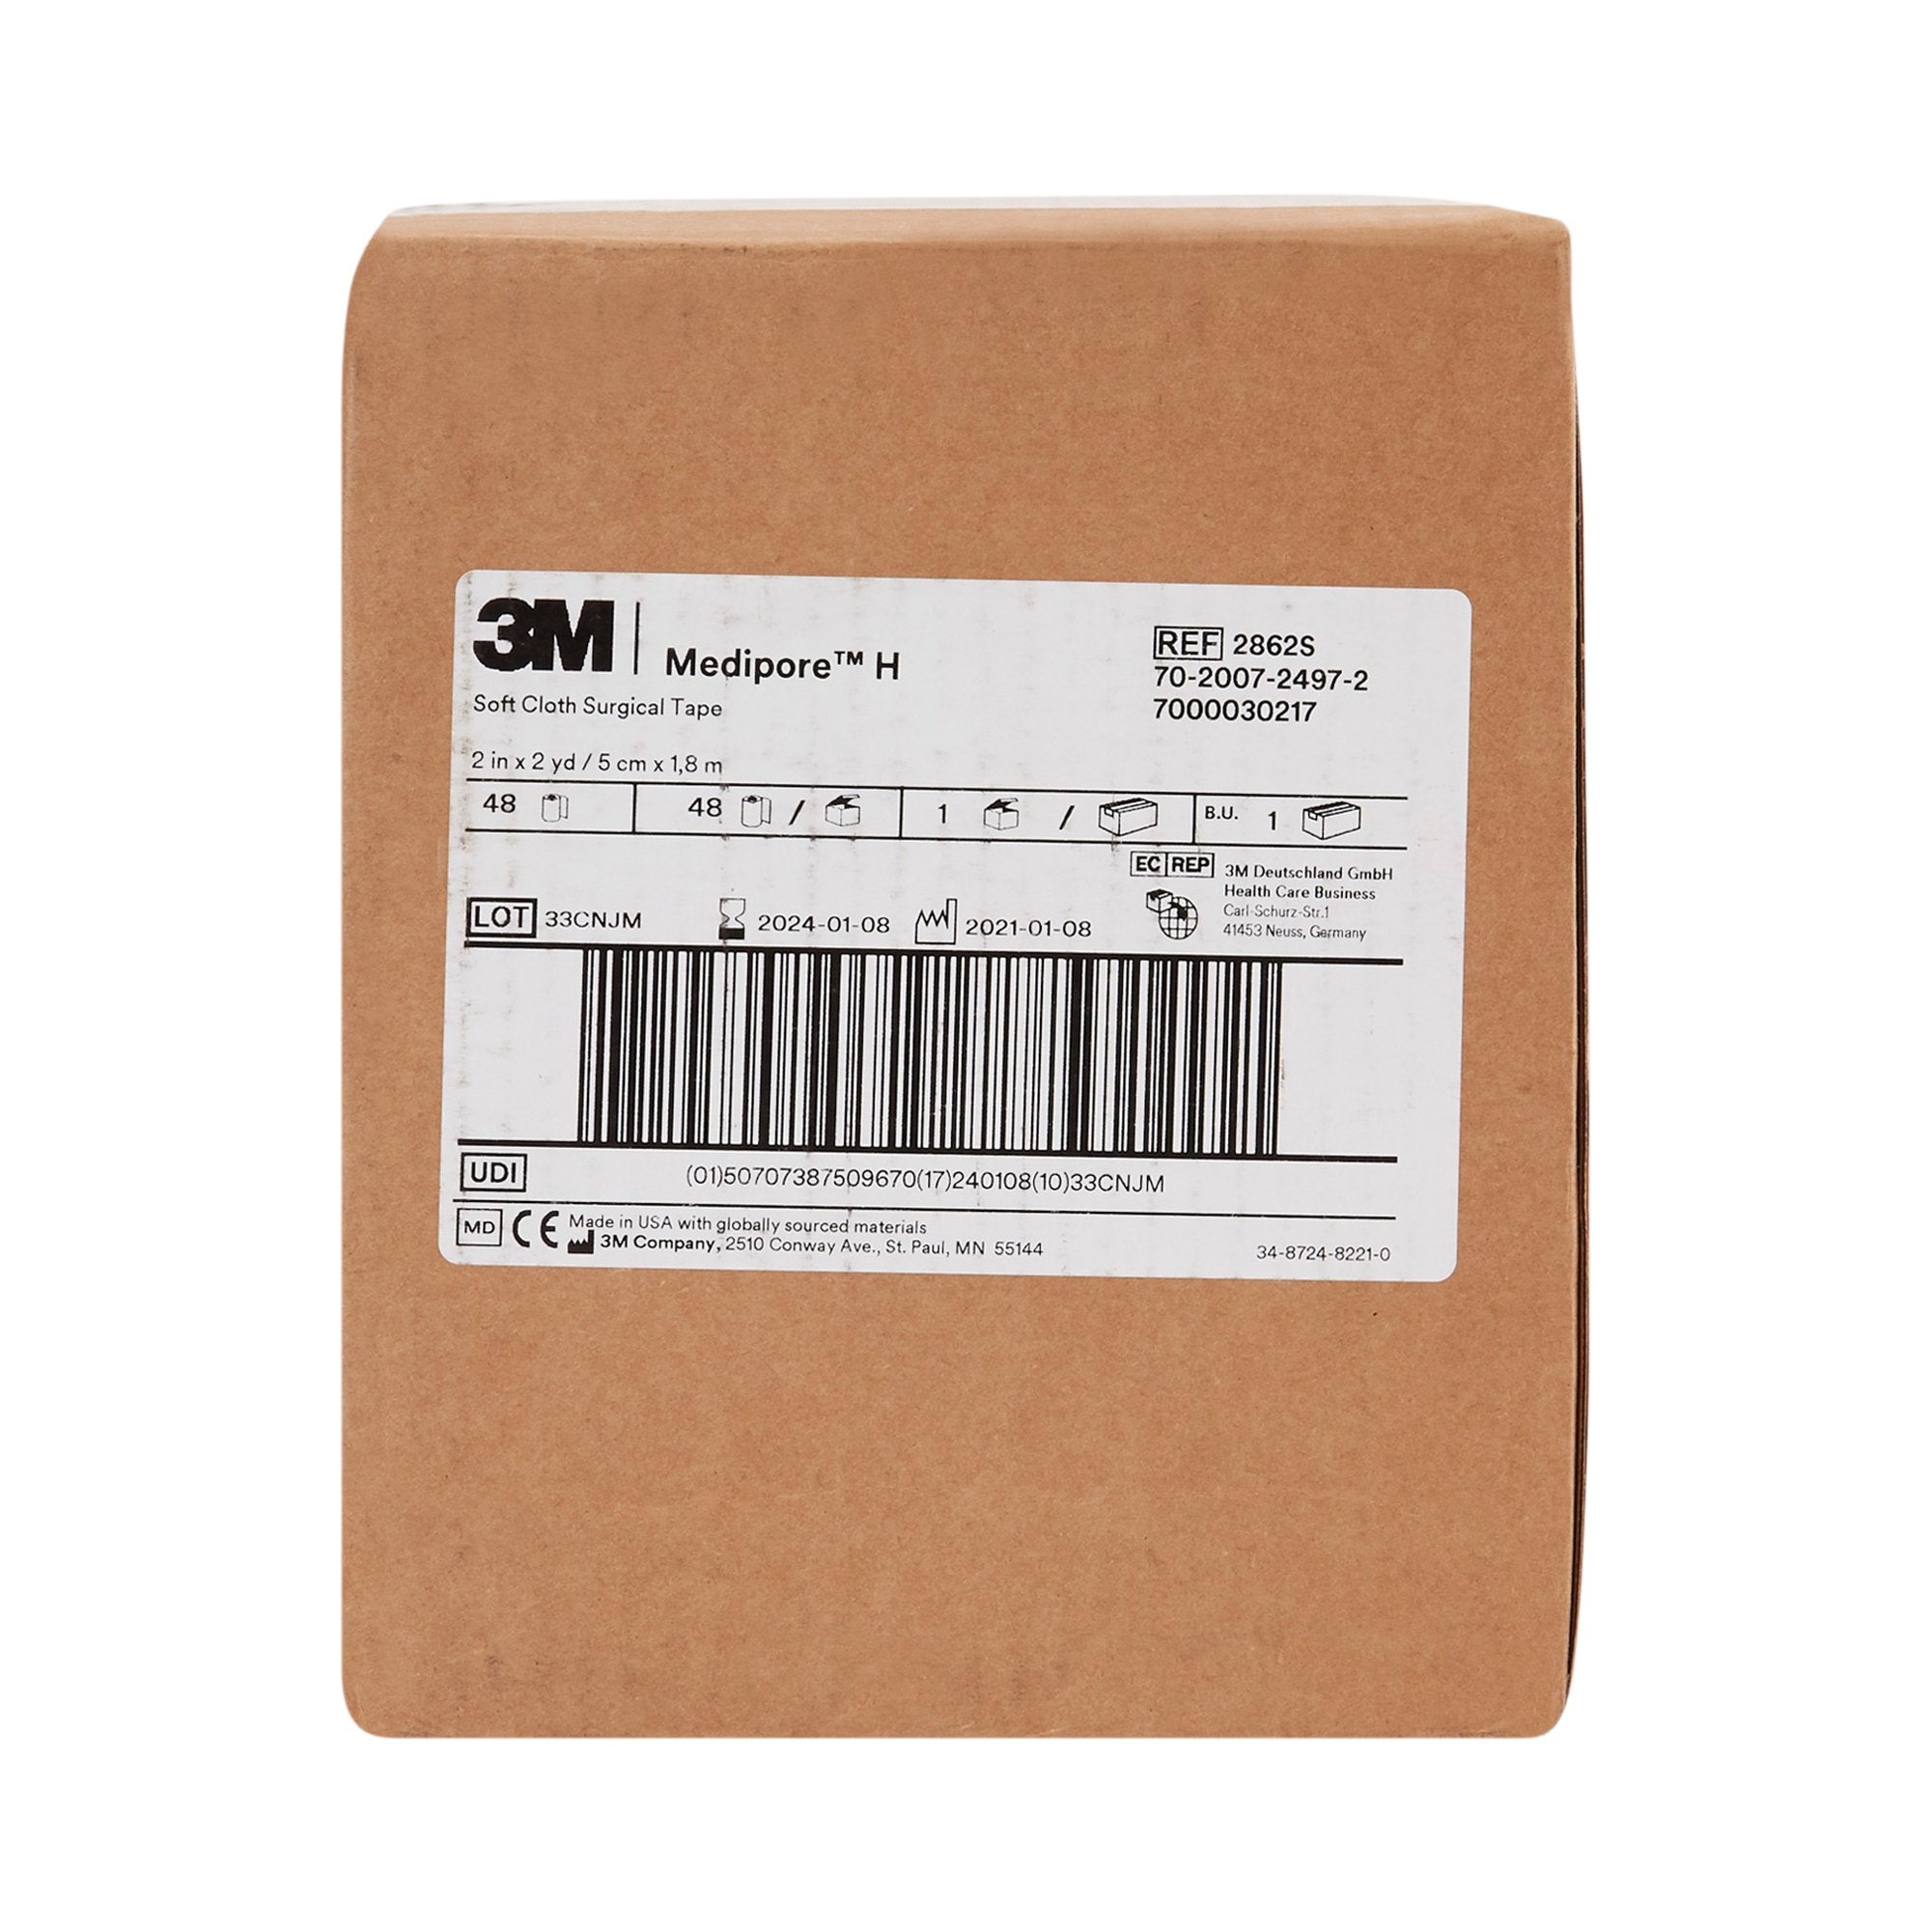 3M Medipore Cloth Surgical Tapes